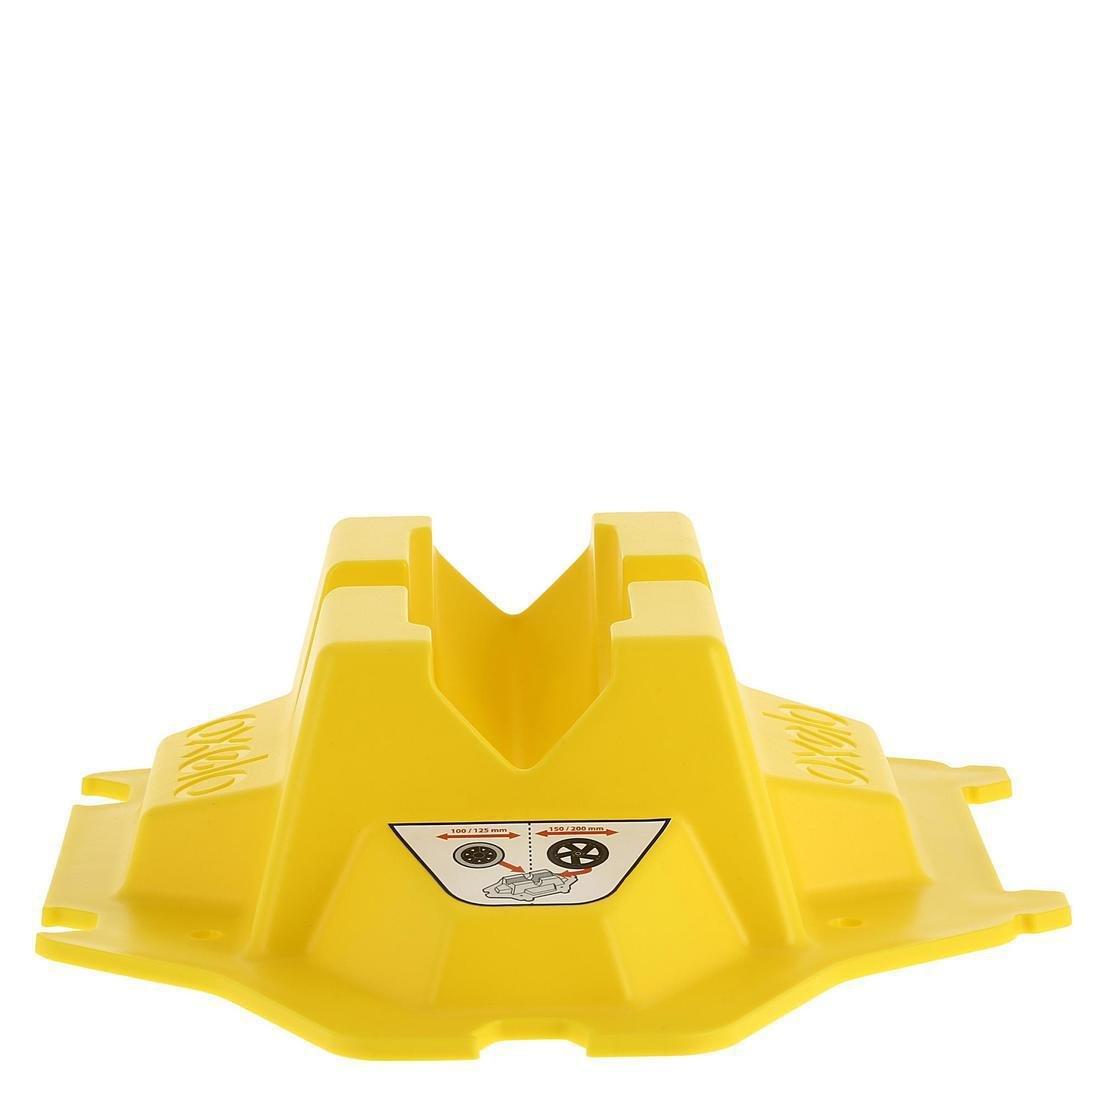 OXELO - Scooter Rack, Yellow